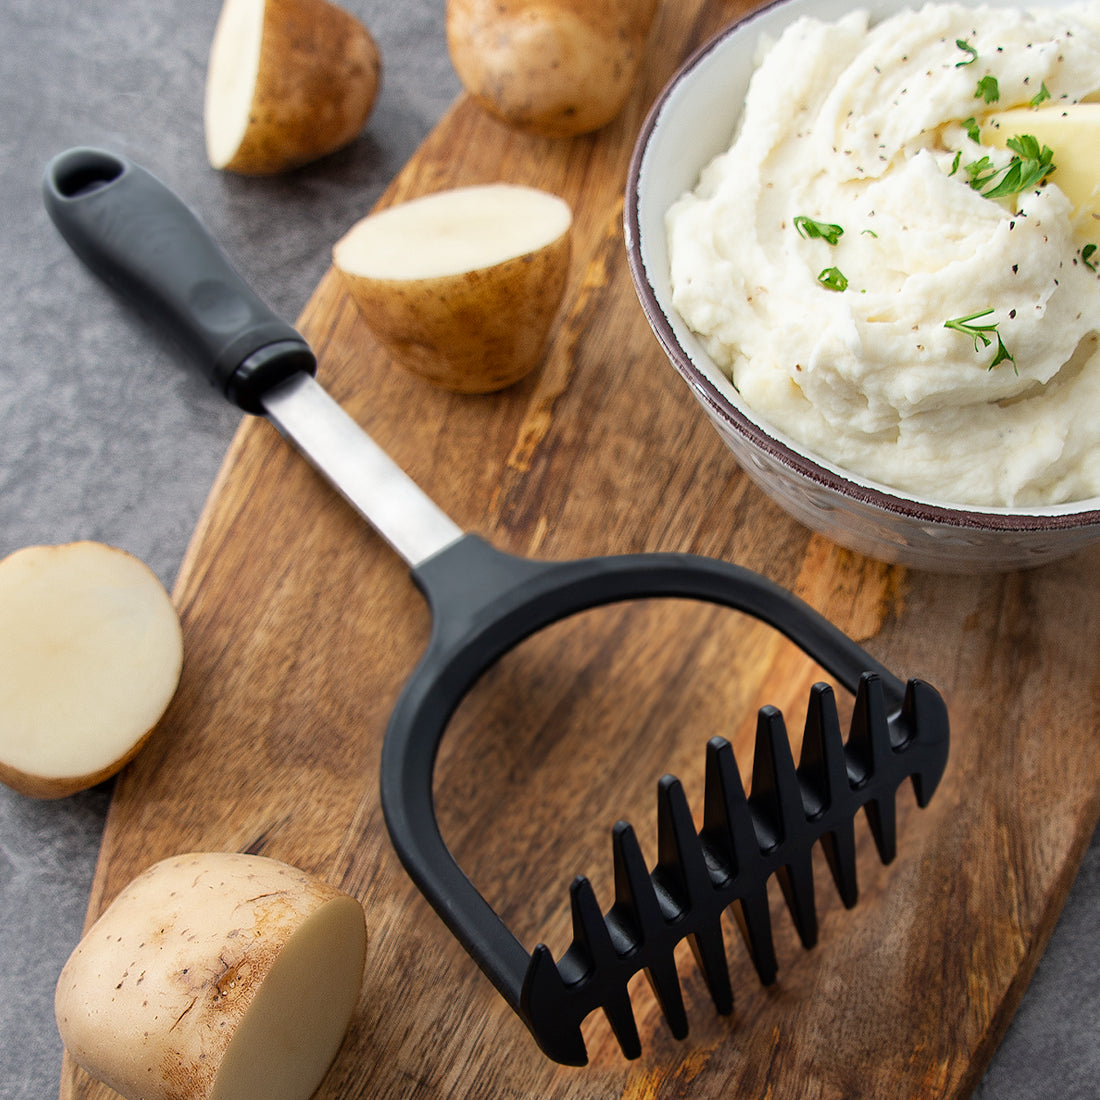 Rada Cutlery Potato Masher next to a bowl of mashed potatoes and whole potatoes on a cutting board.